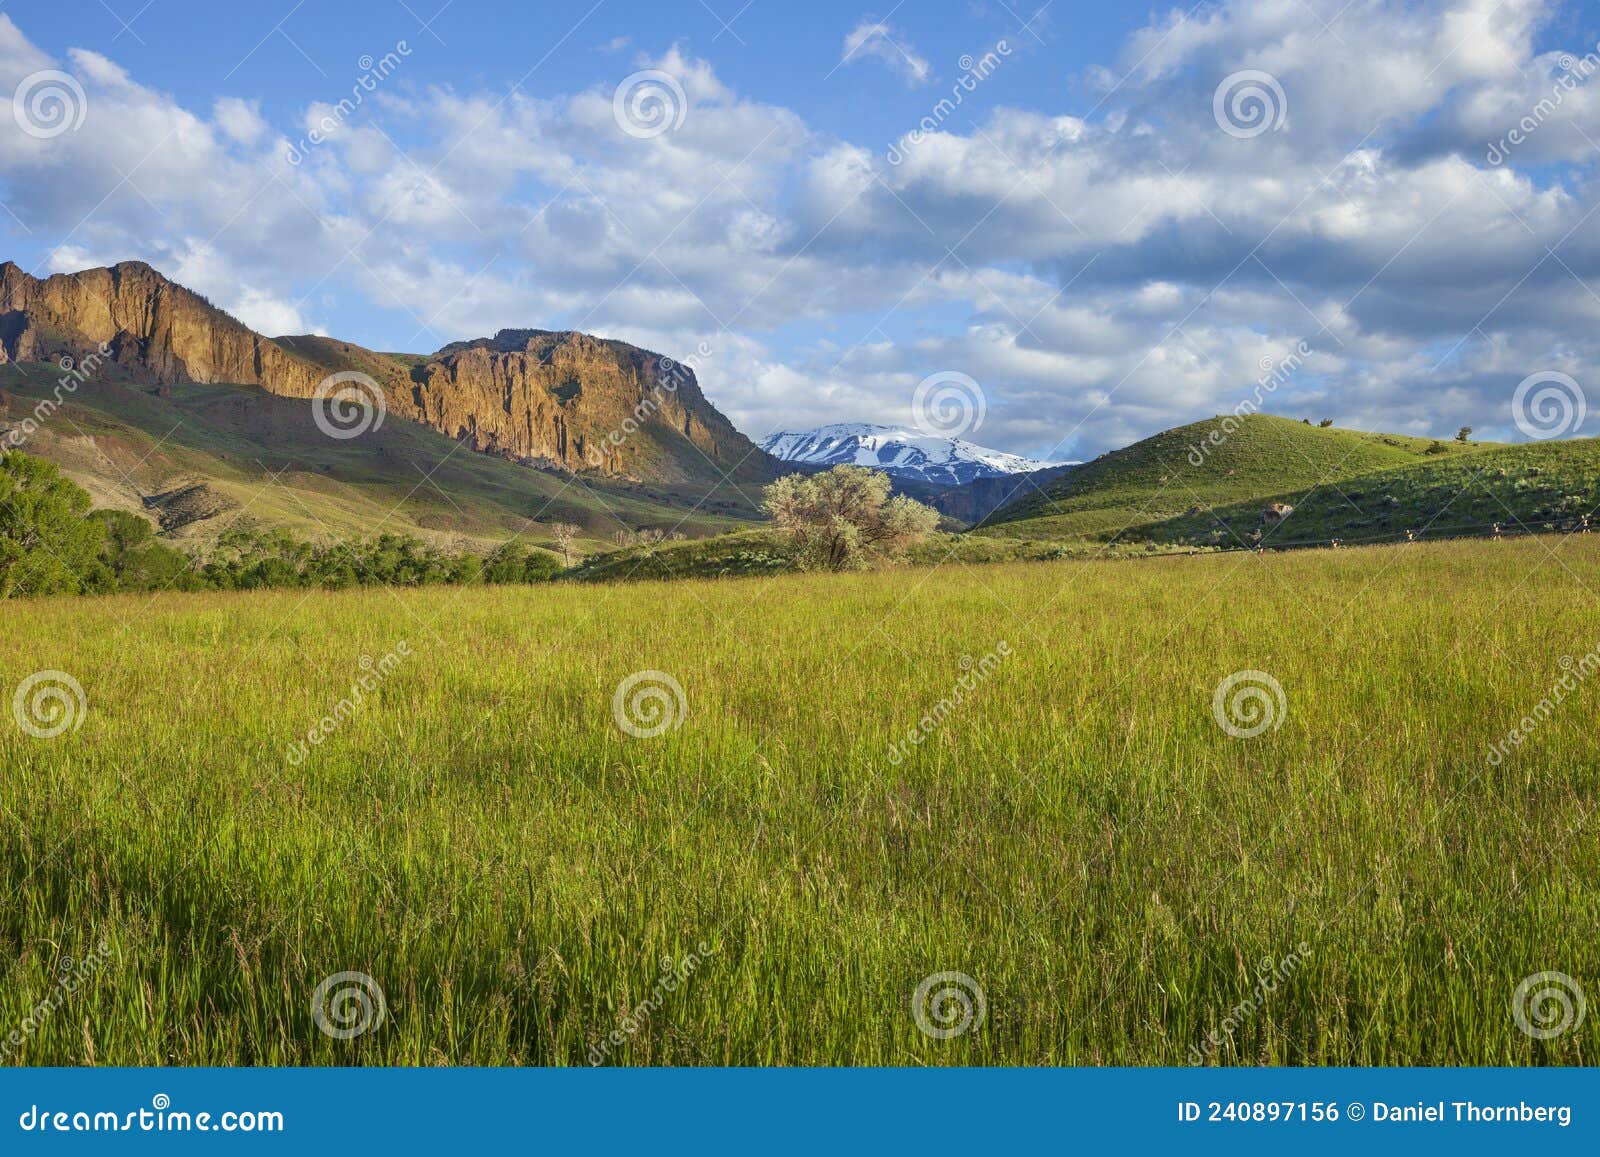 cliffs and snow capped mountains of the absaroka range above a field in western wyoming